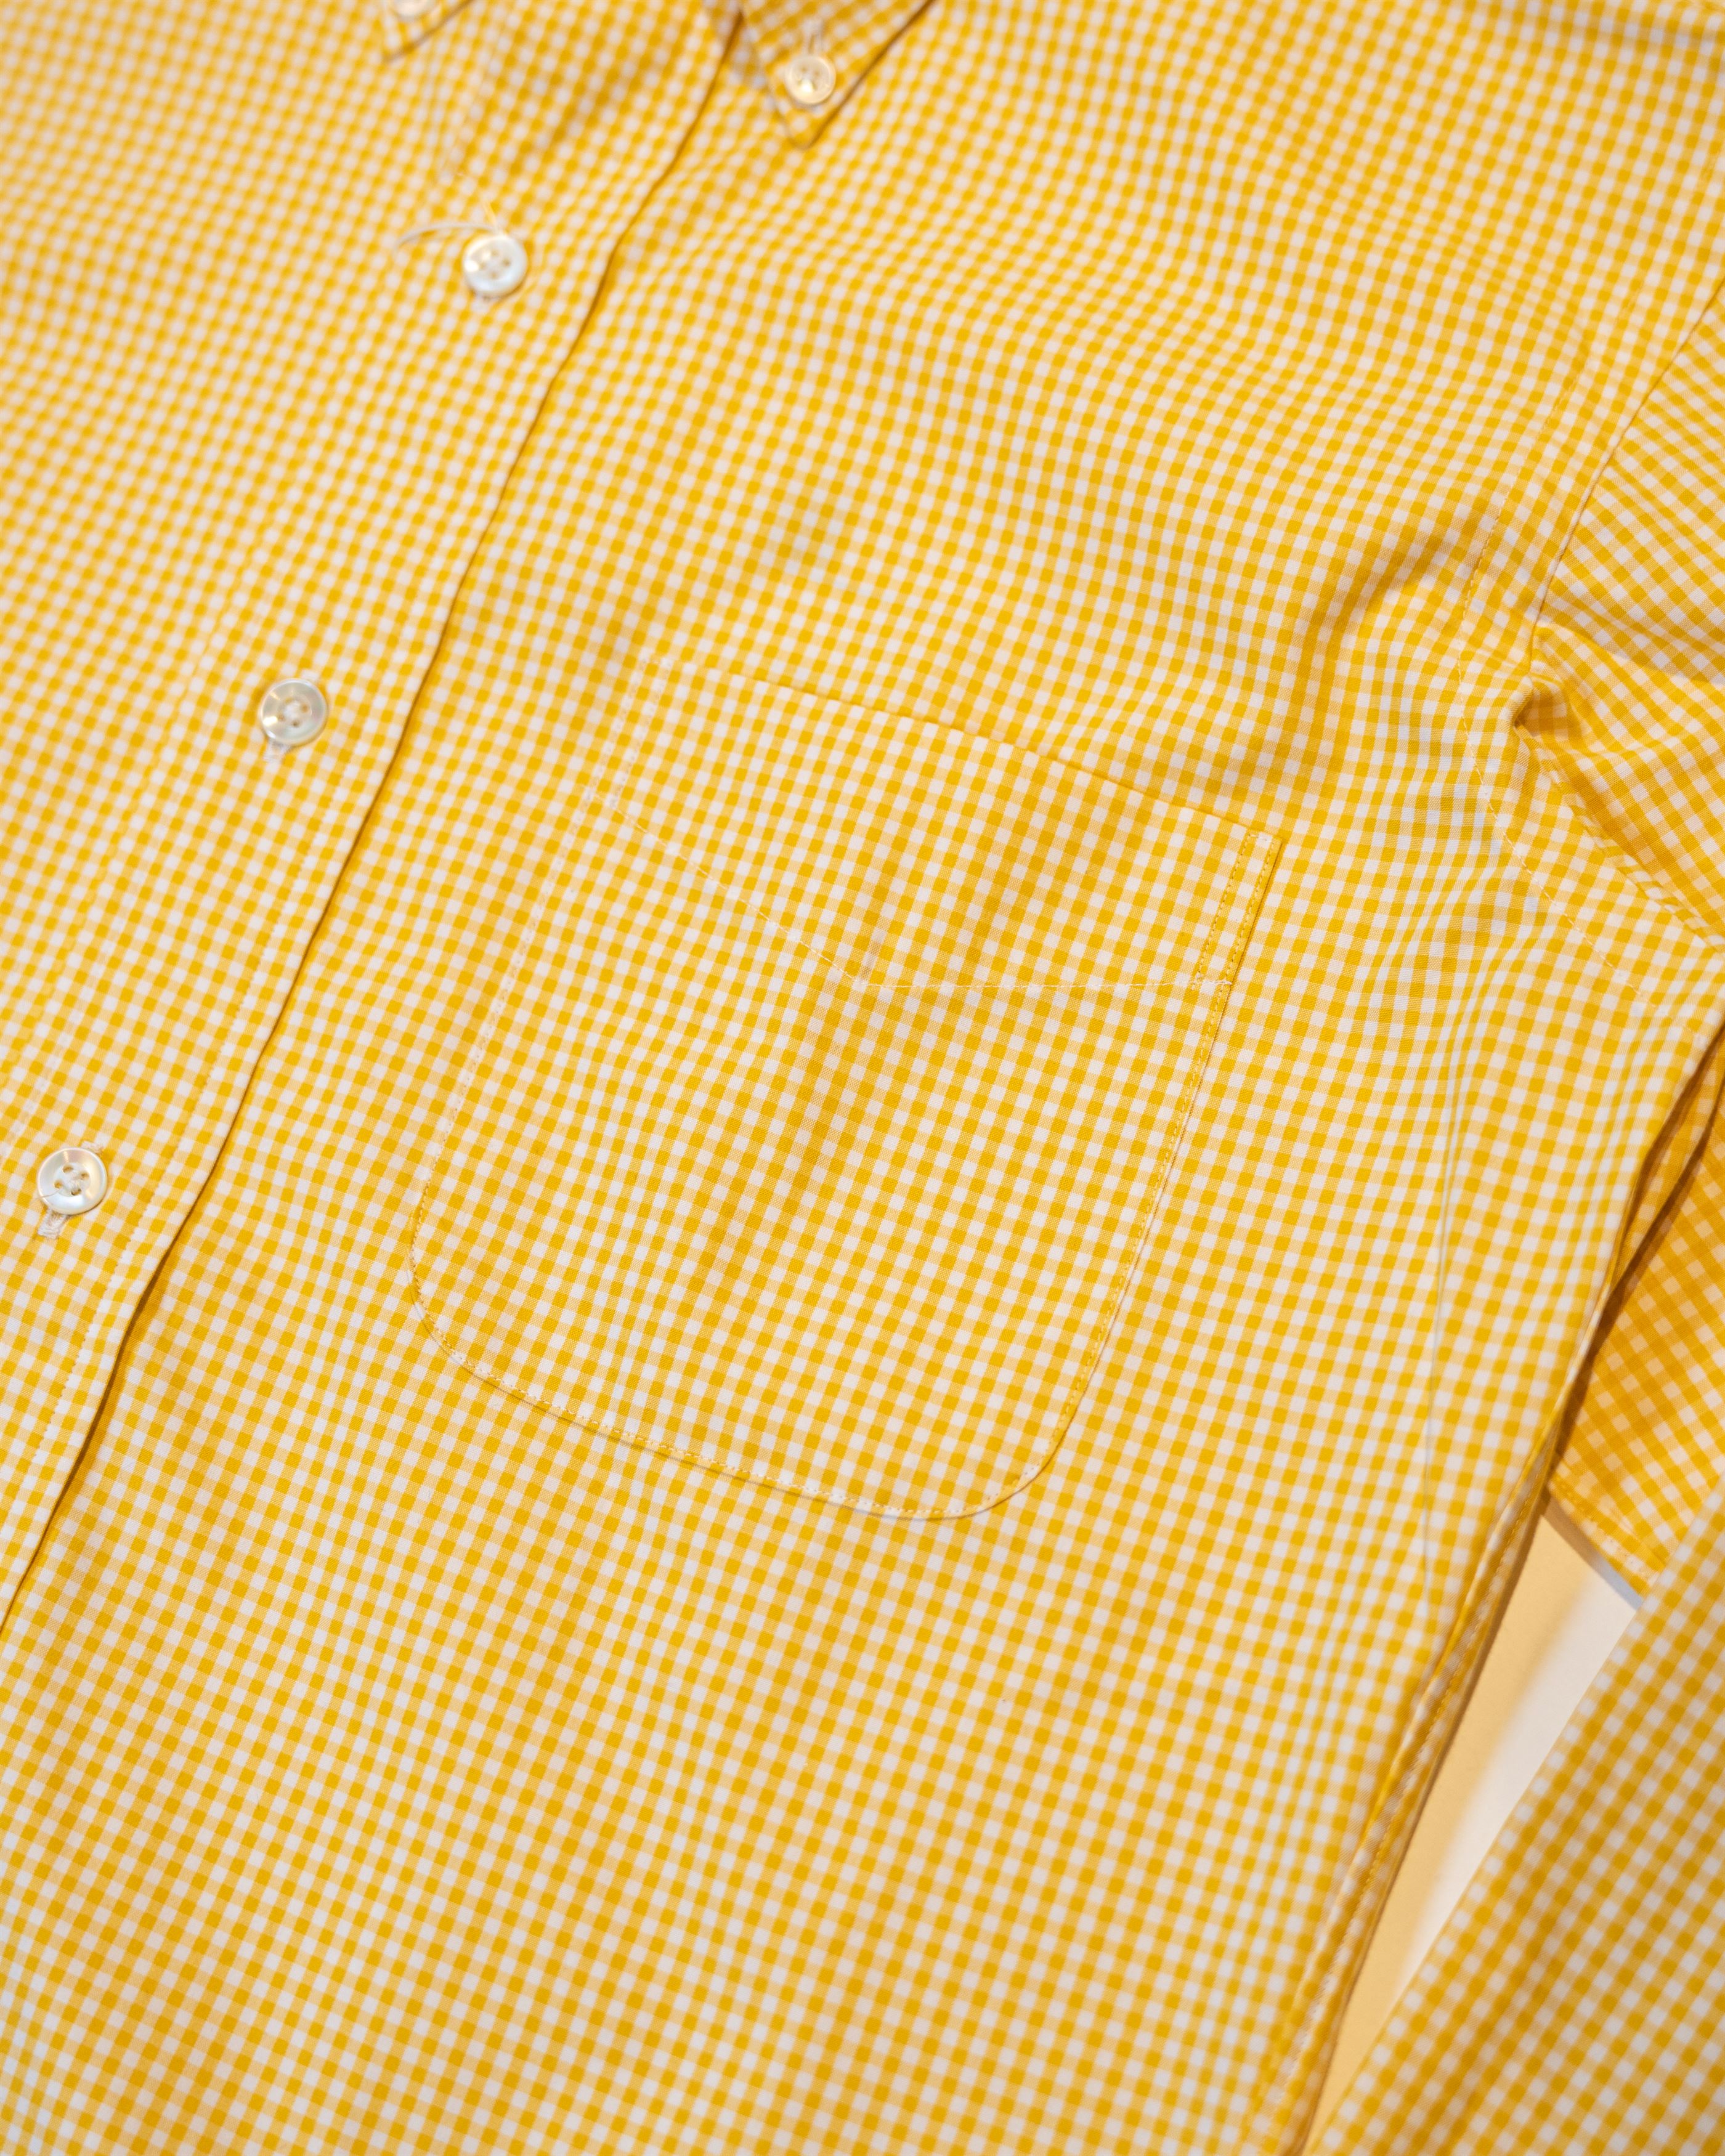 Vintage Ivy Buttondown Broadcloth (Botanical Dyed) | Yellow